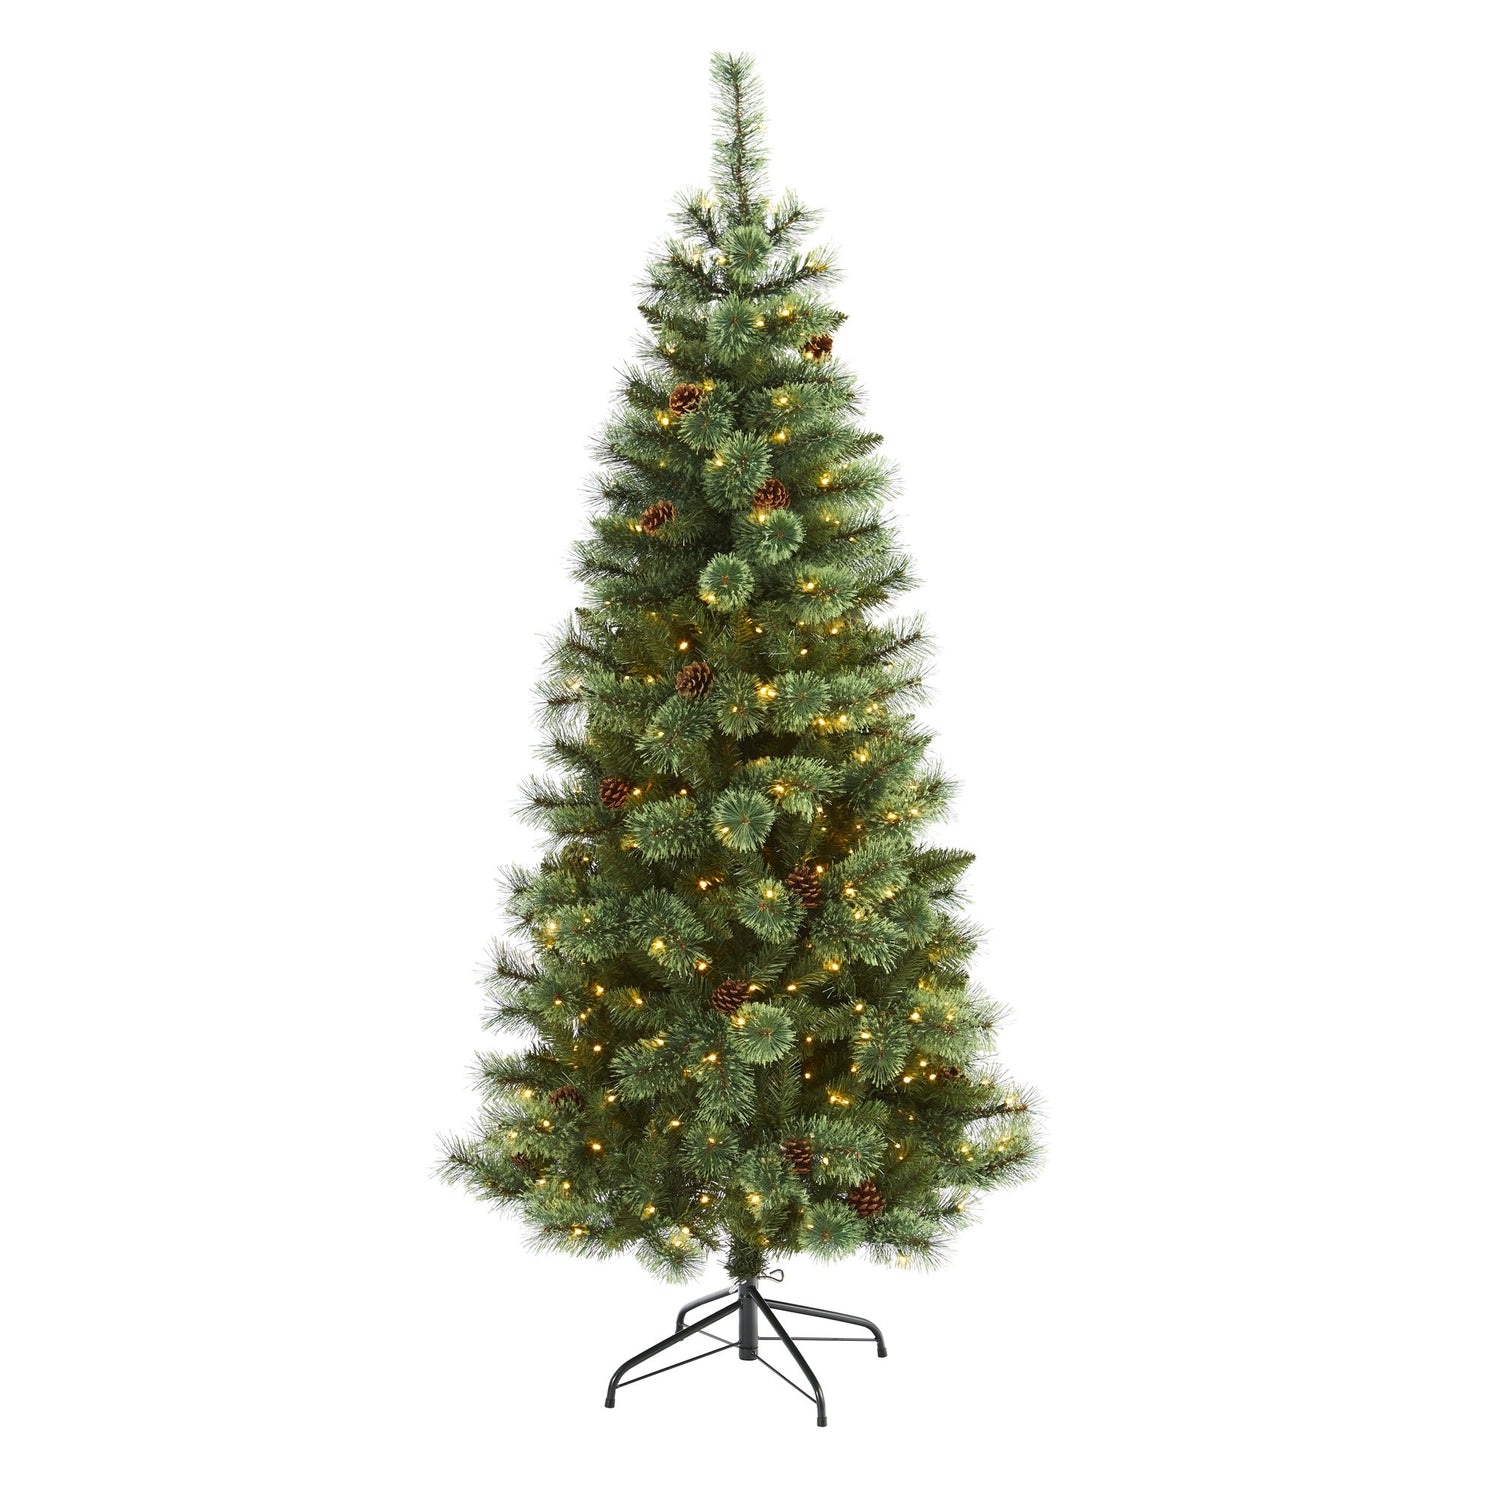 6’ White Mountain Pine Artificial Christmas Tree with 300 Clear LED Lights and Pine Cones